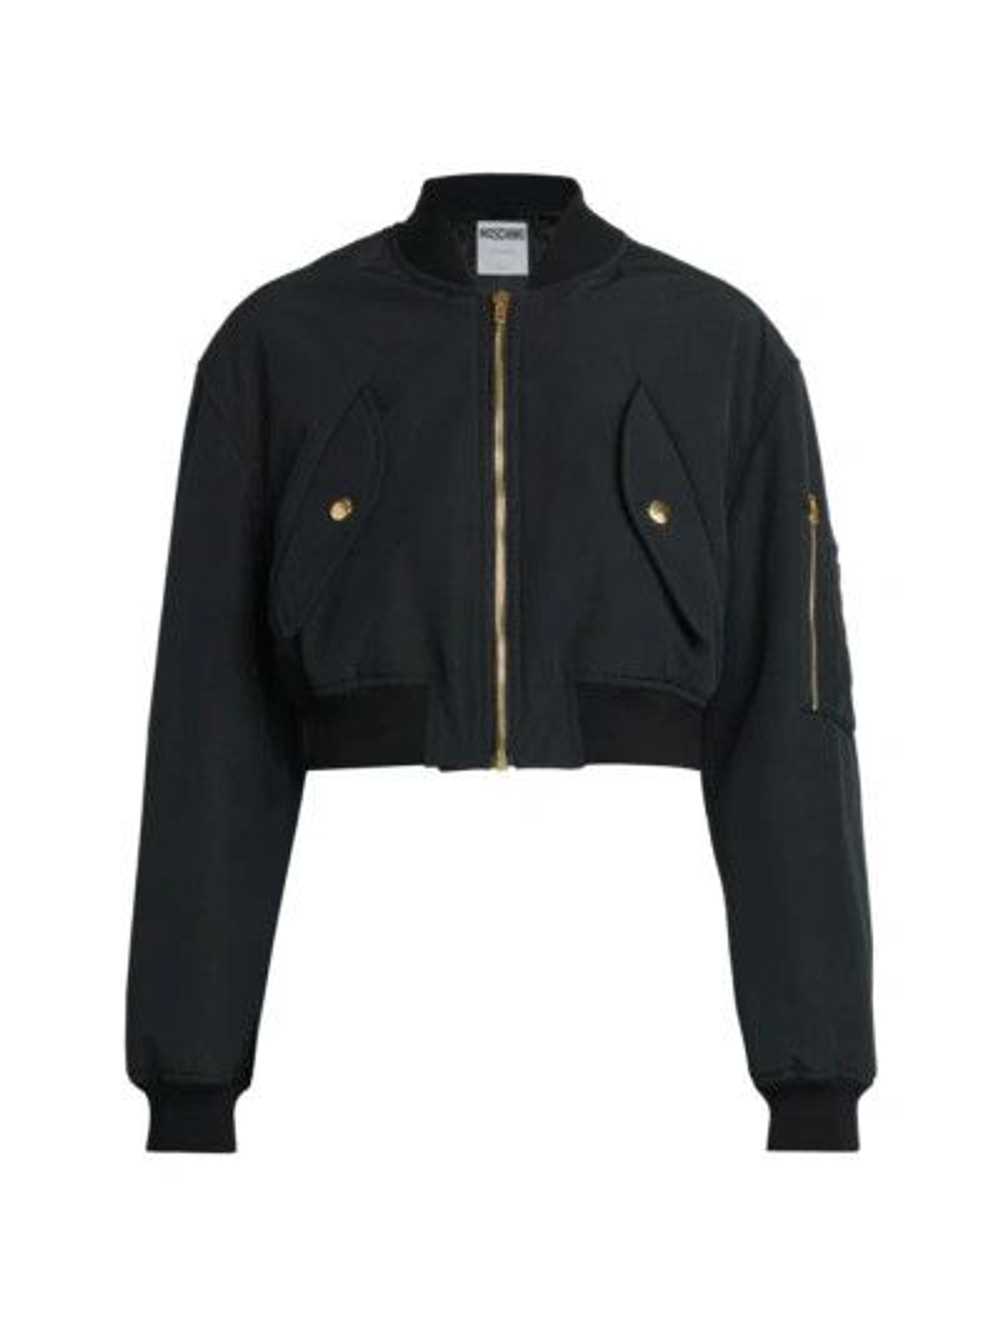 Moschino os11x0624 Bomber Jackets in Black - image 1